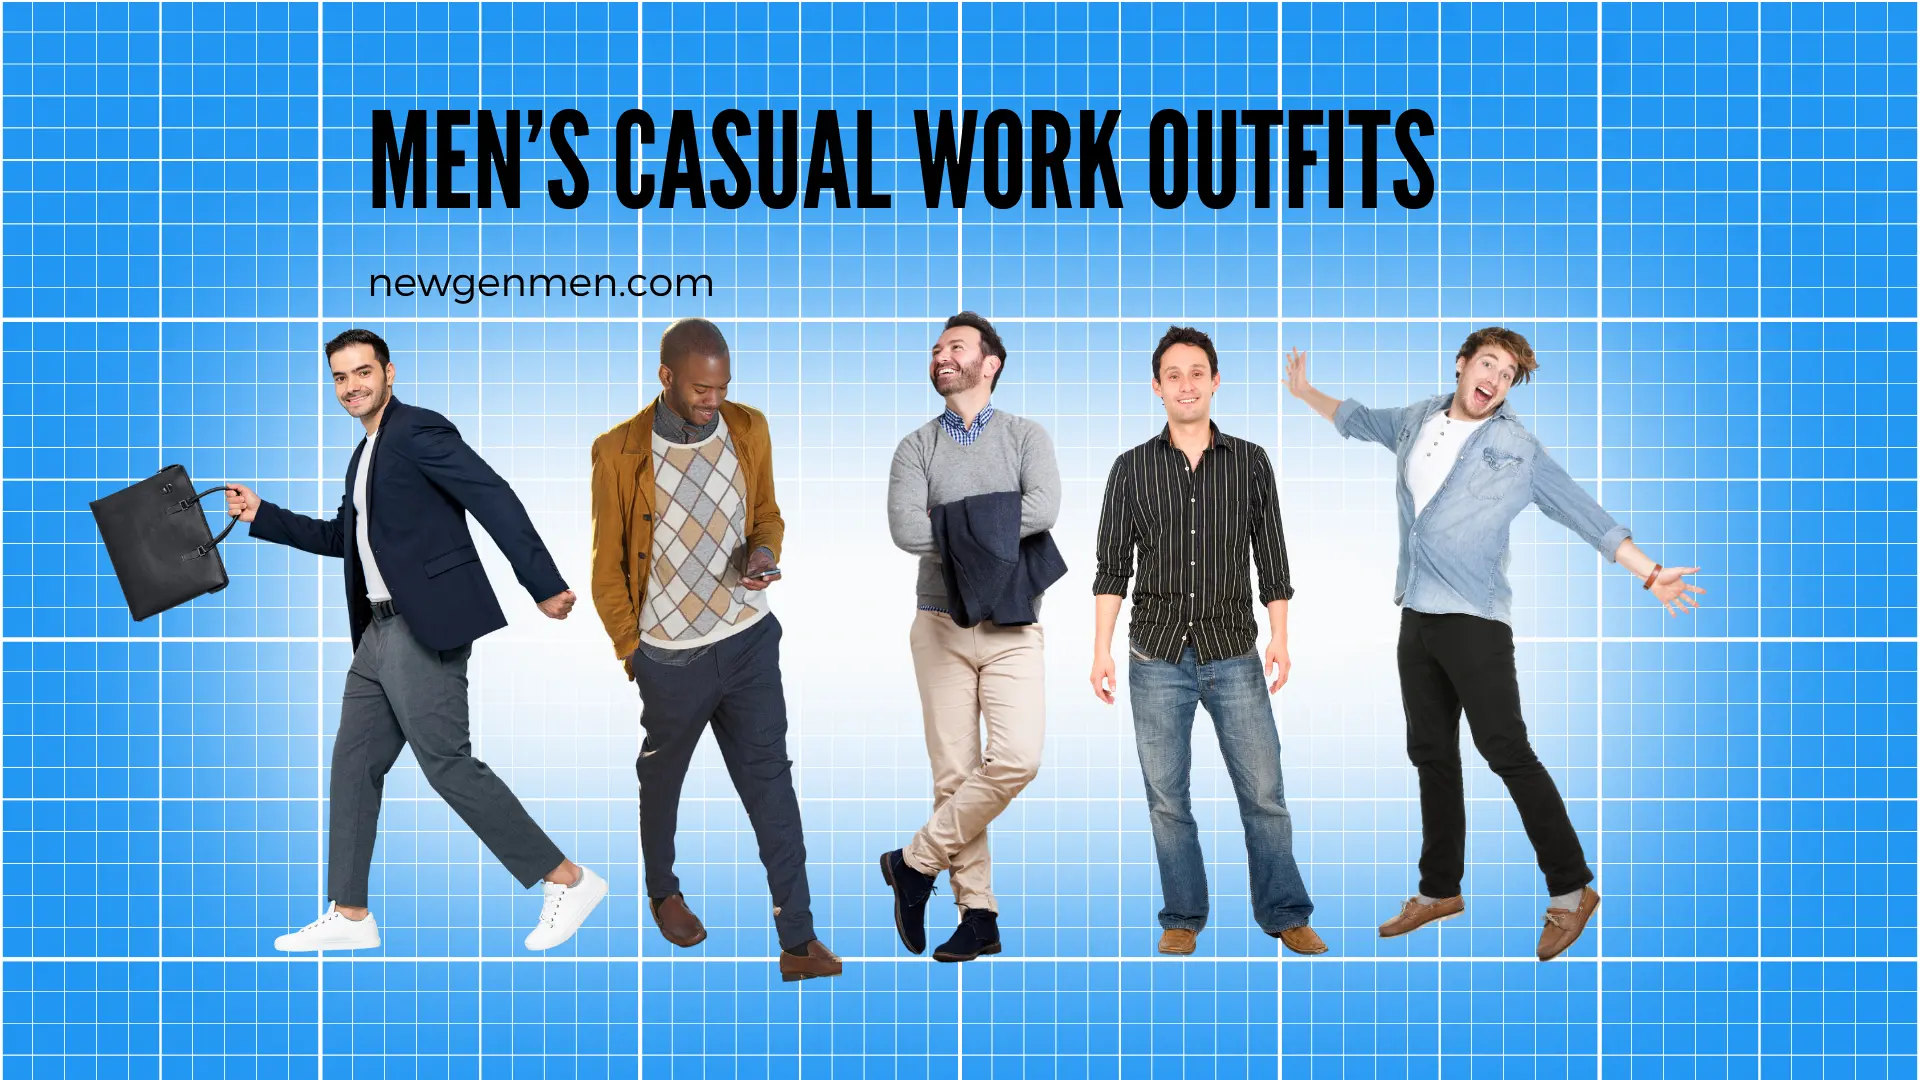 Men’s Casual Work Outfits: What To Wear To The Office